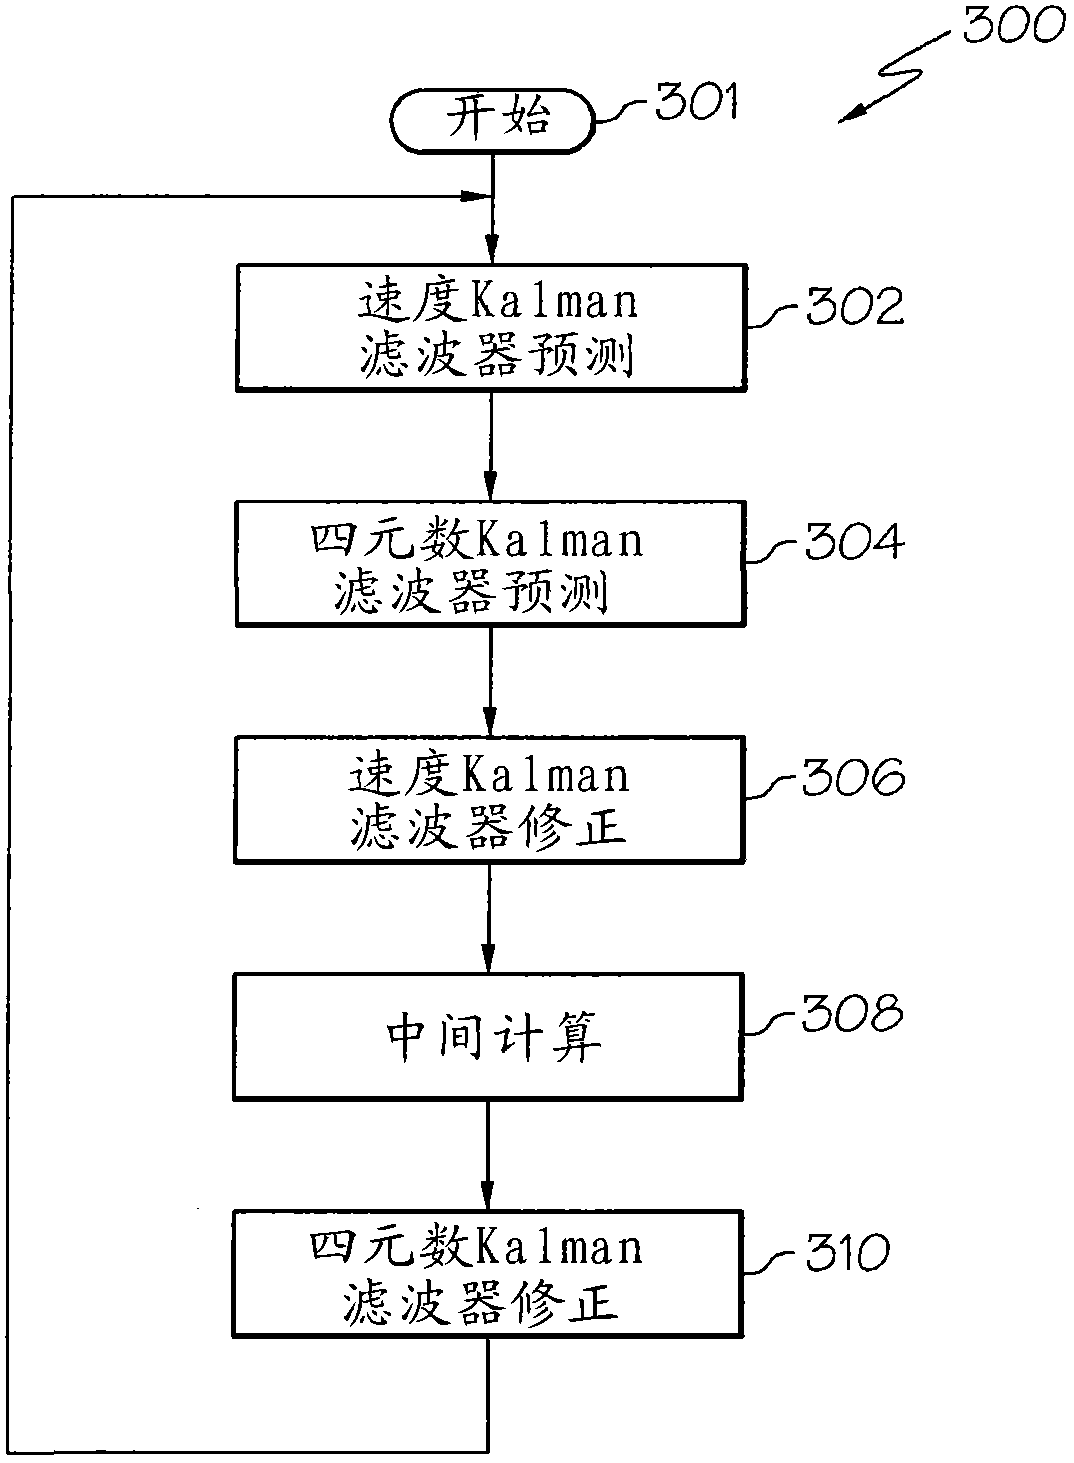 Crane jib attitude and heading reference system and method